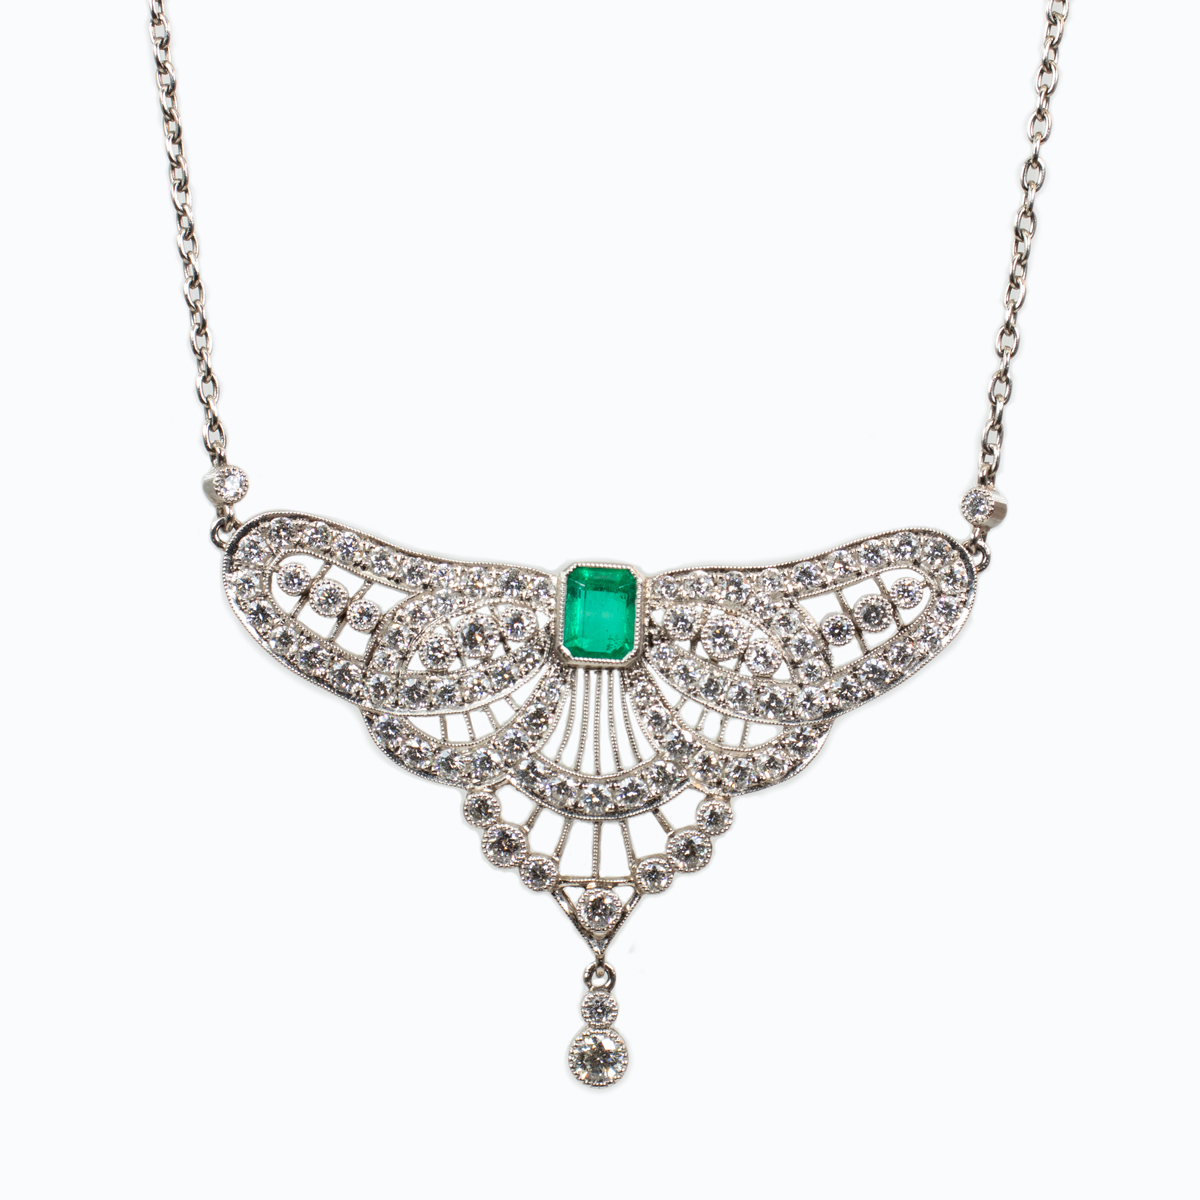 Vintage Diamond Necklace with an Emerald